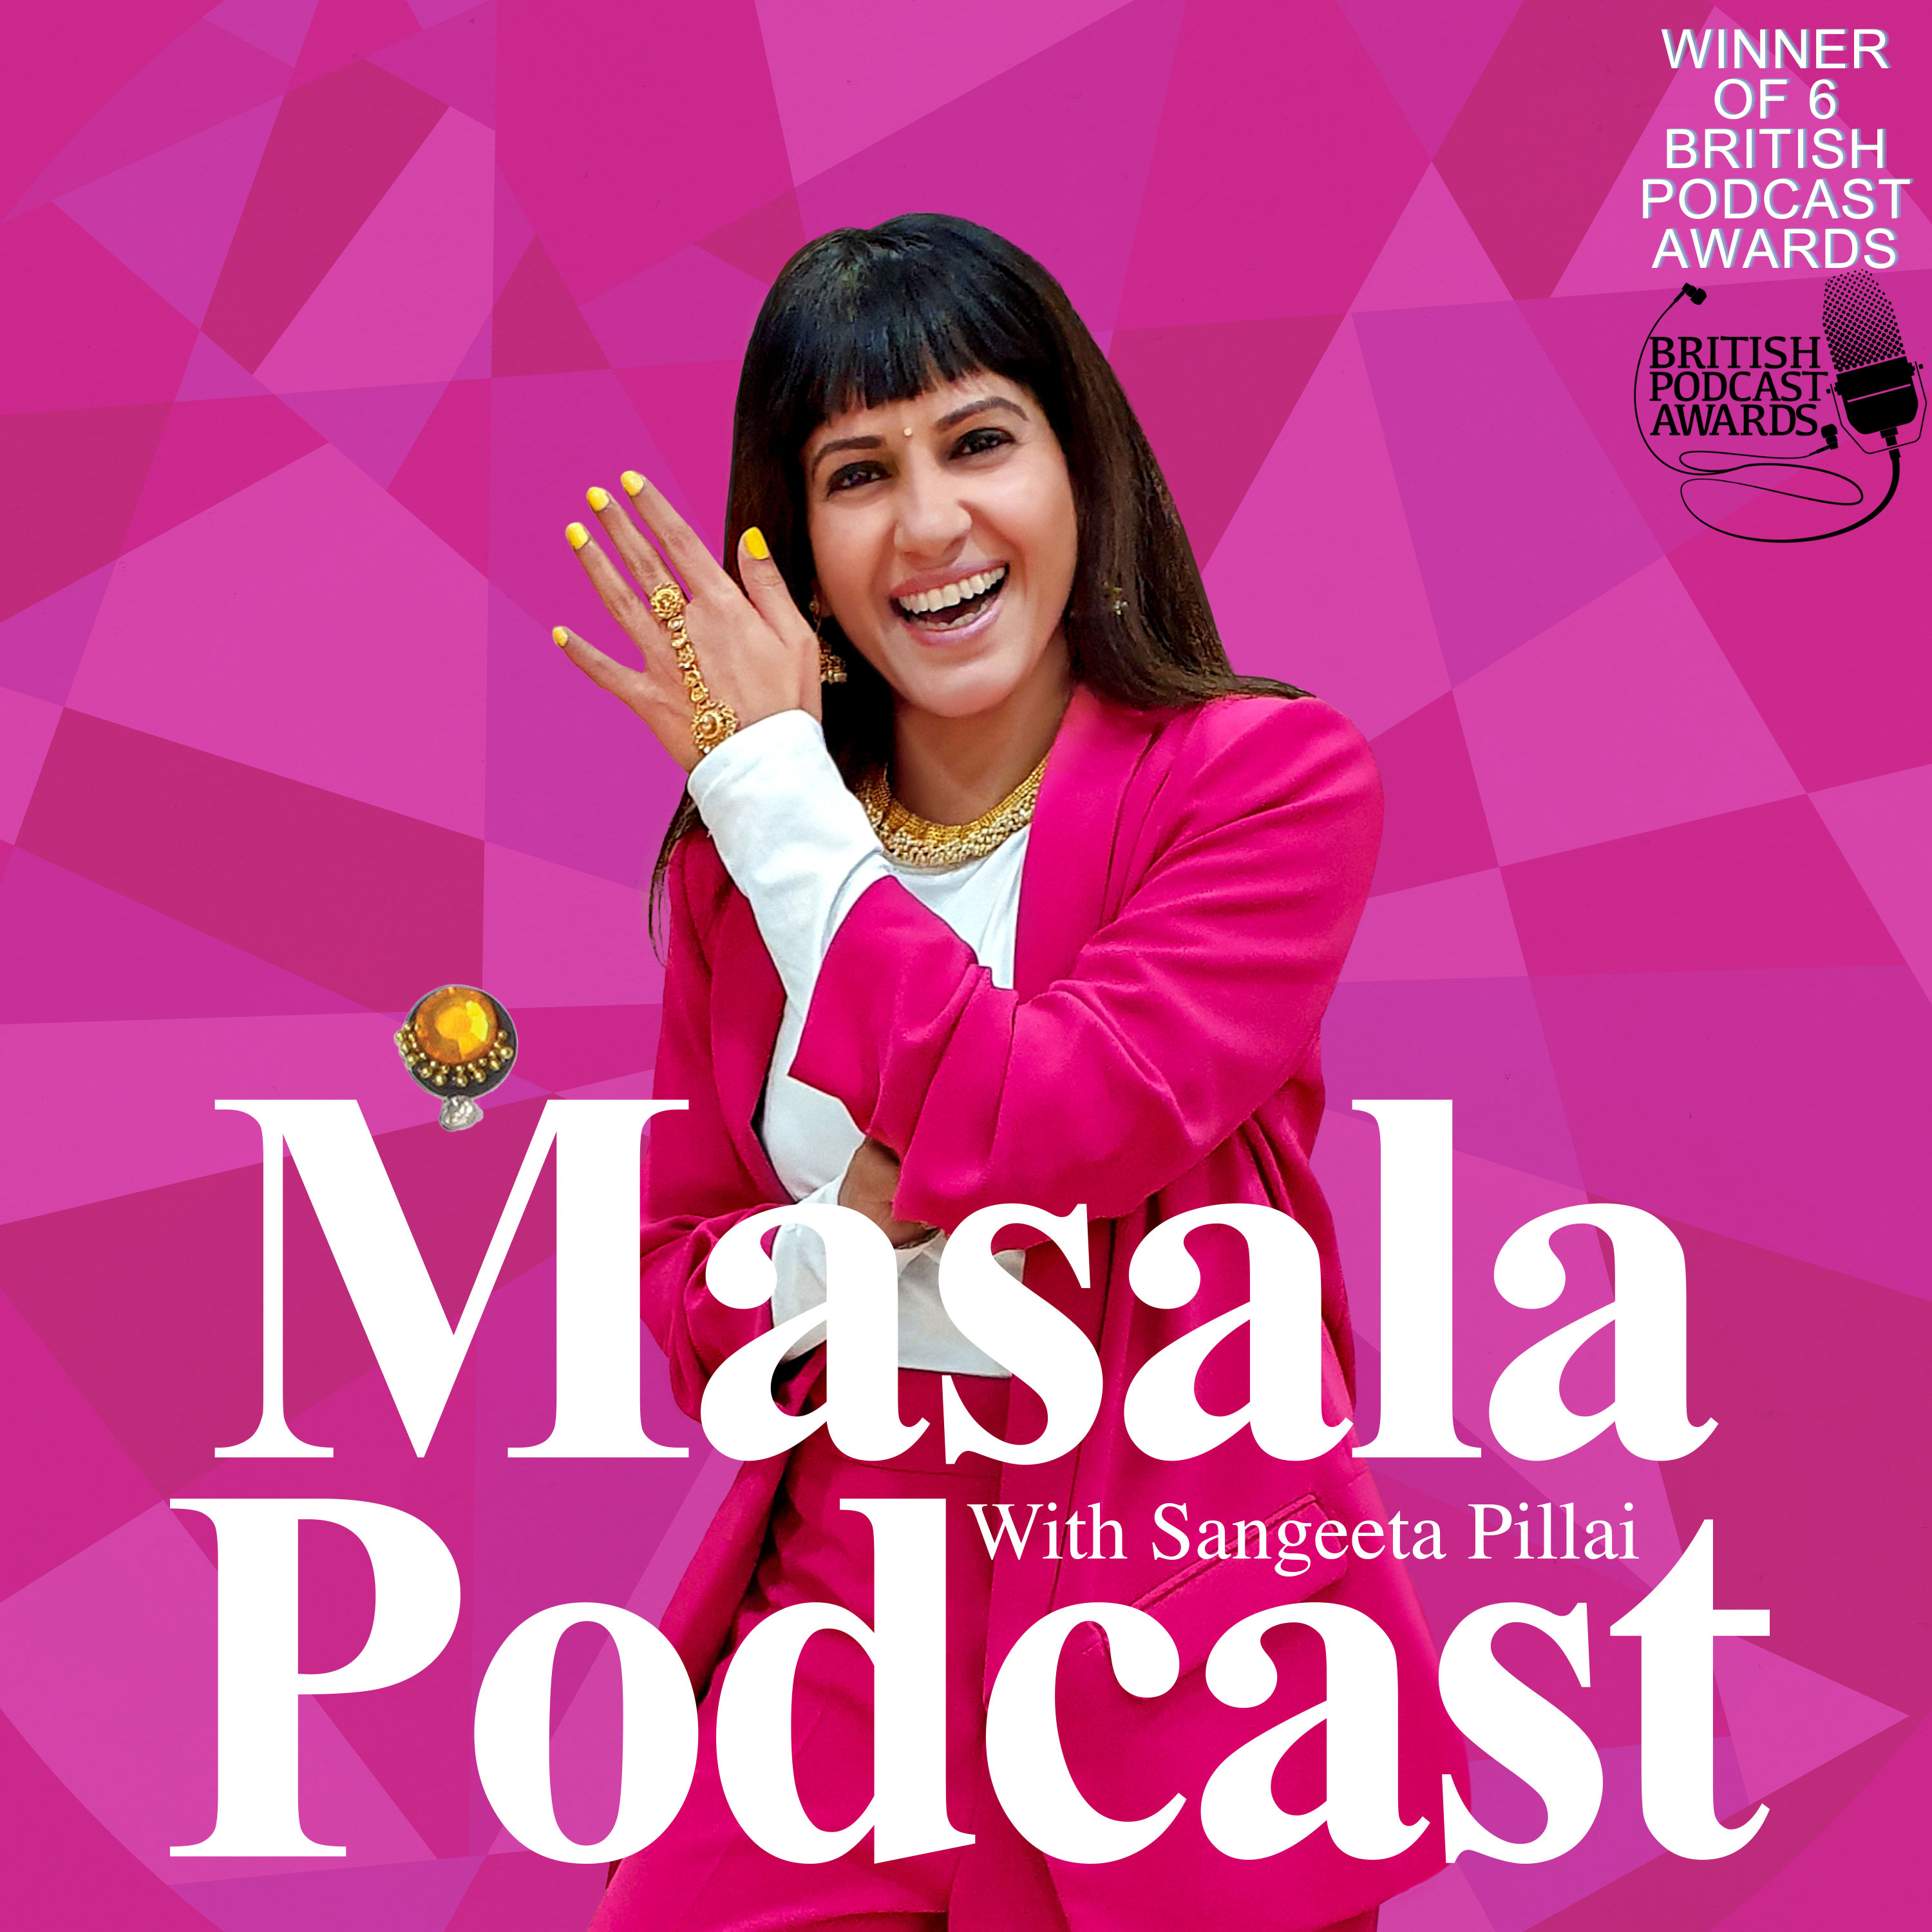 Masala Podcast: The South Asian feminist podcast podcast show image